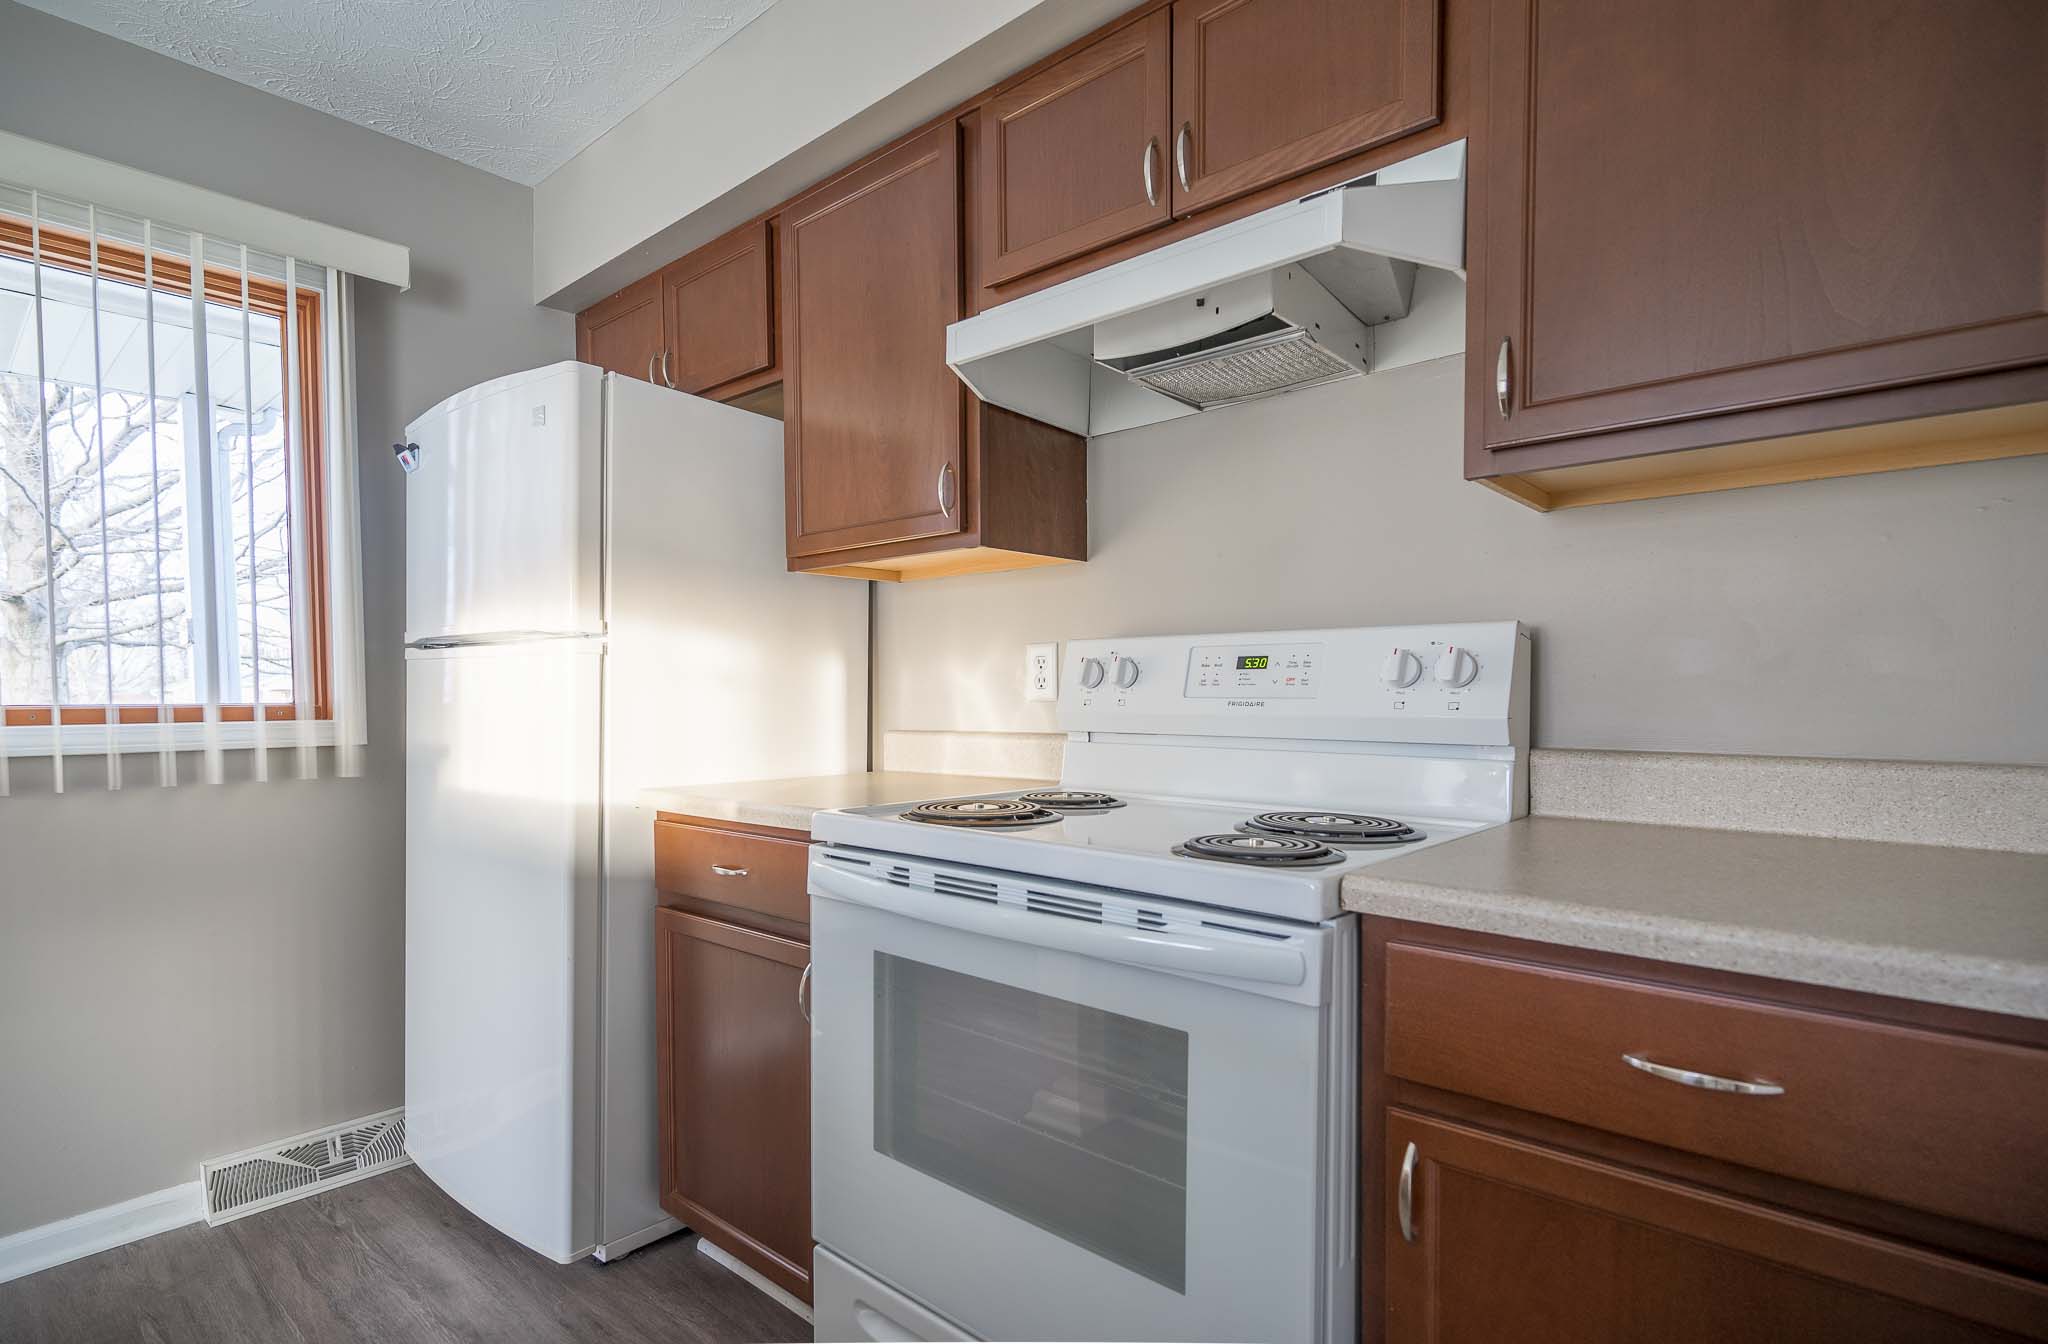 Equipped Kitchen at Village Walk Apartments in Webster, New York 